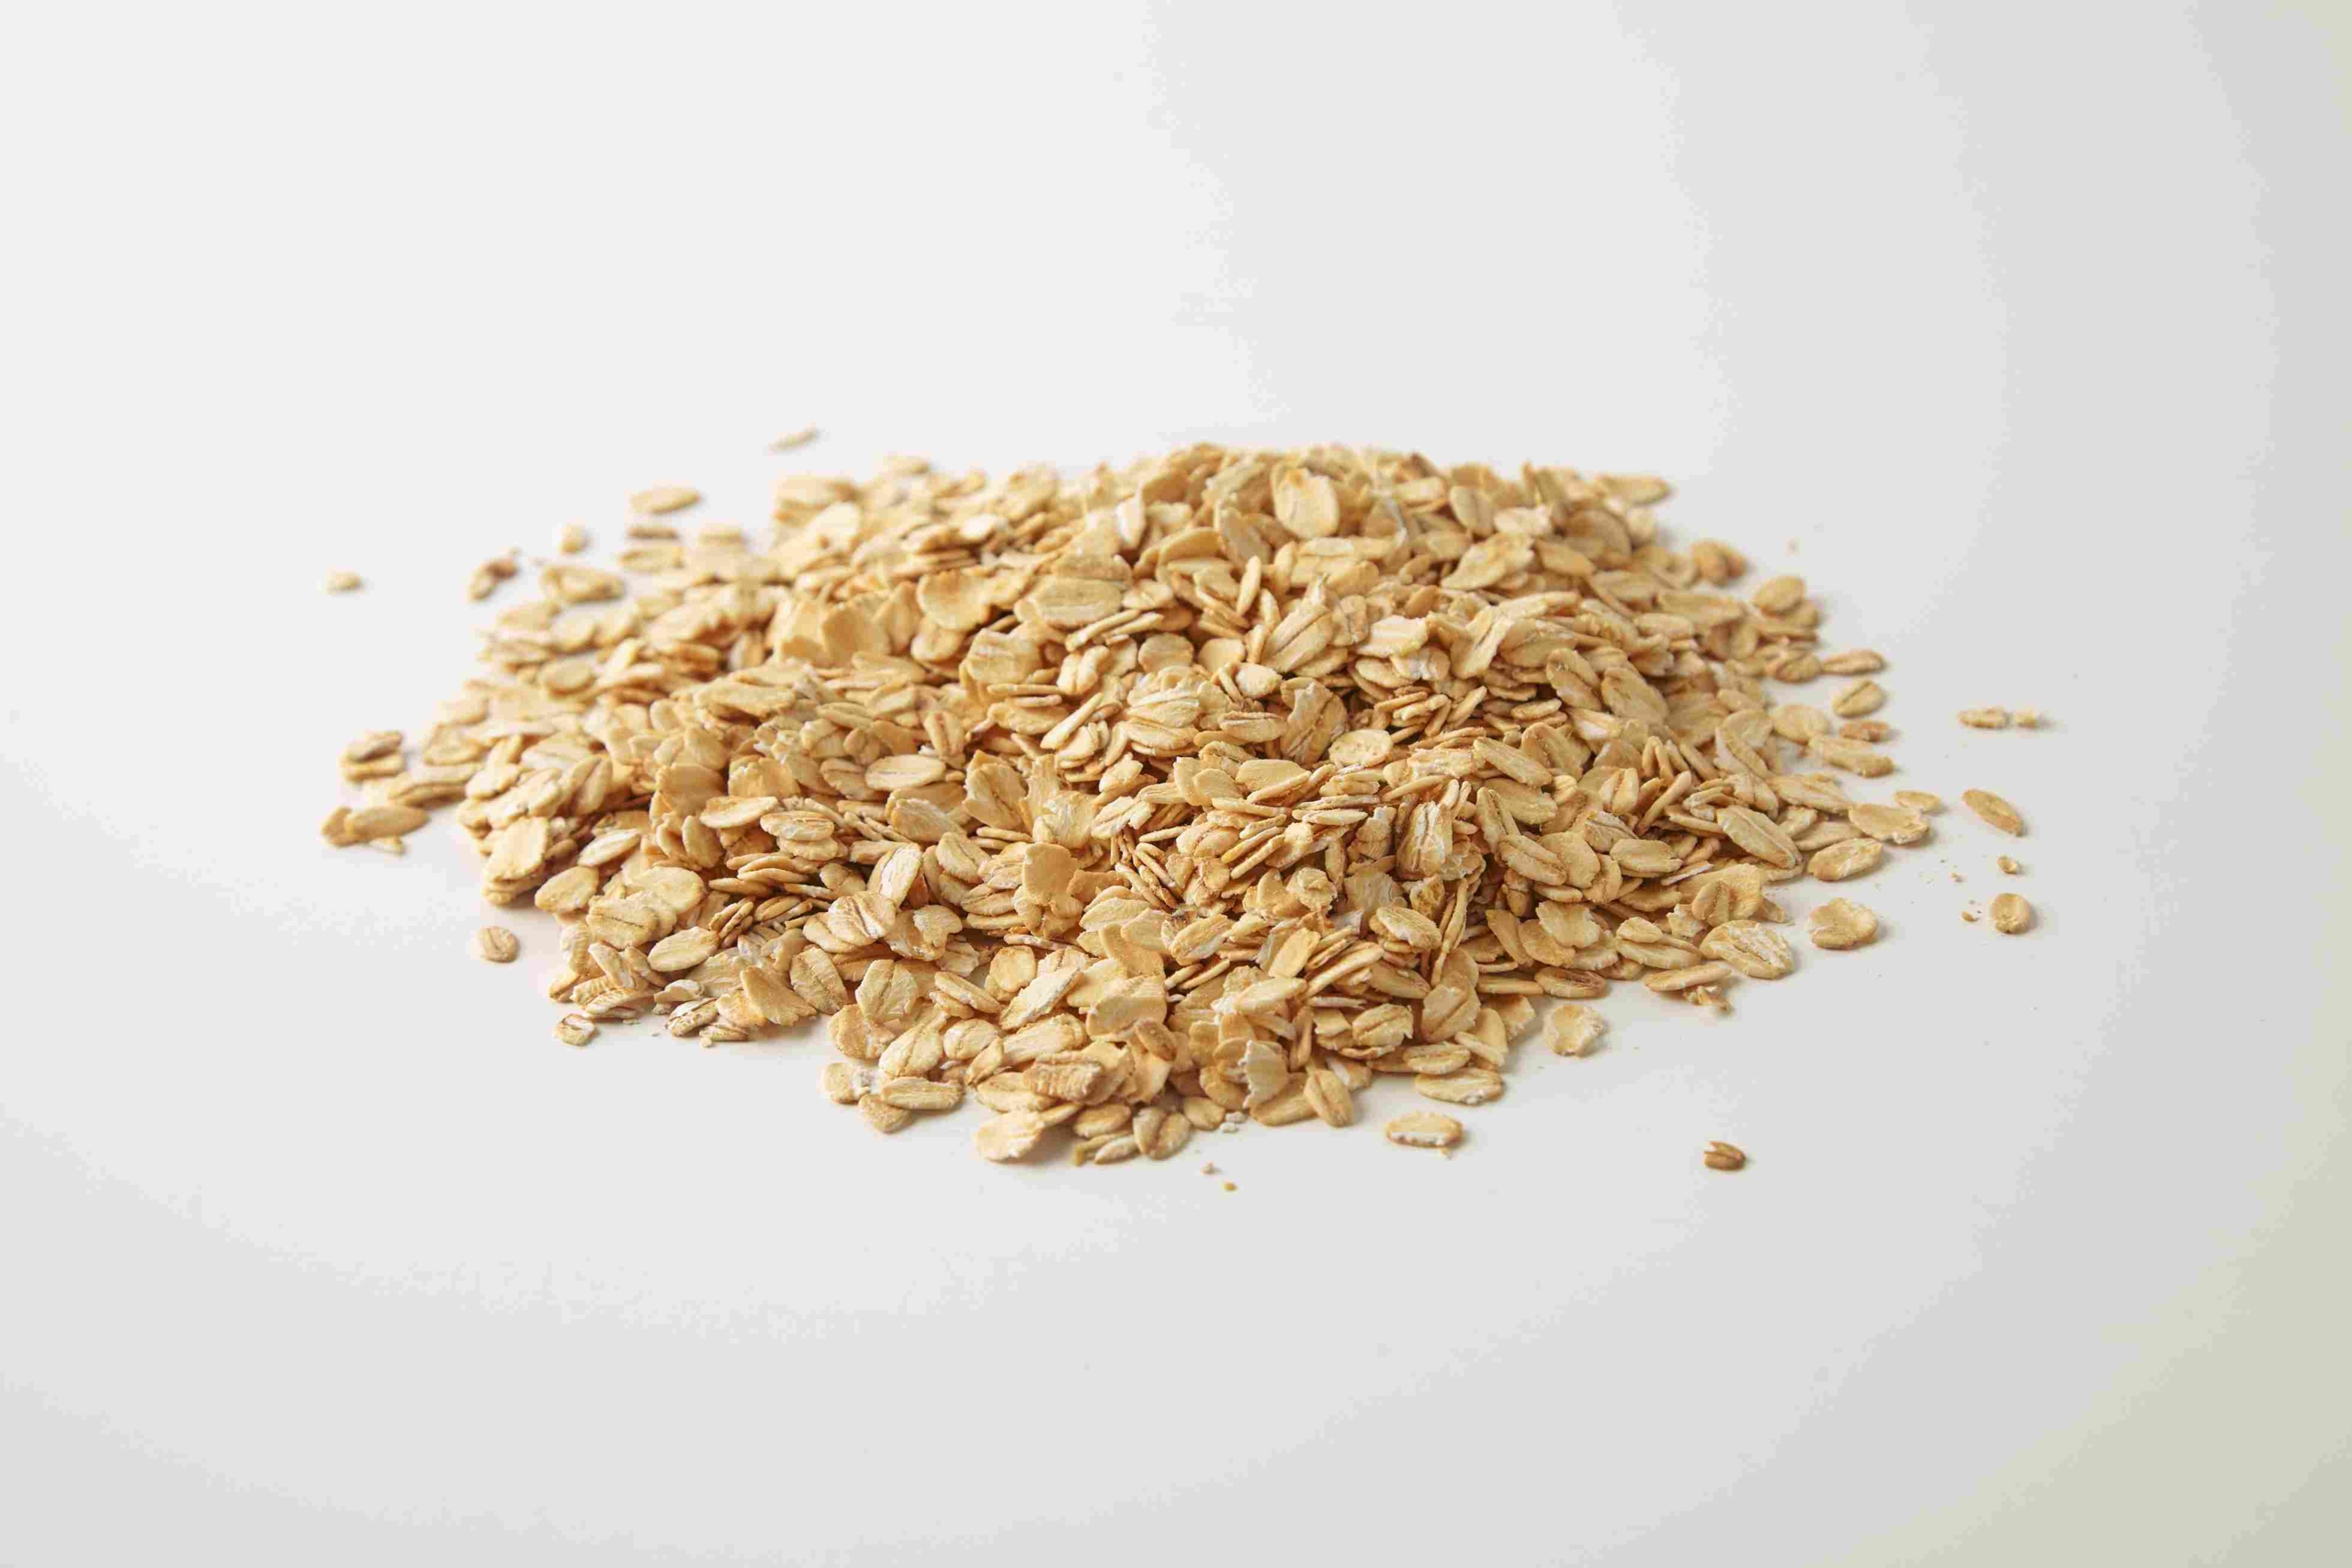 healthy diet rolled-oats